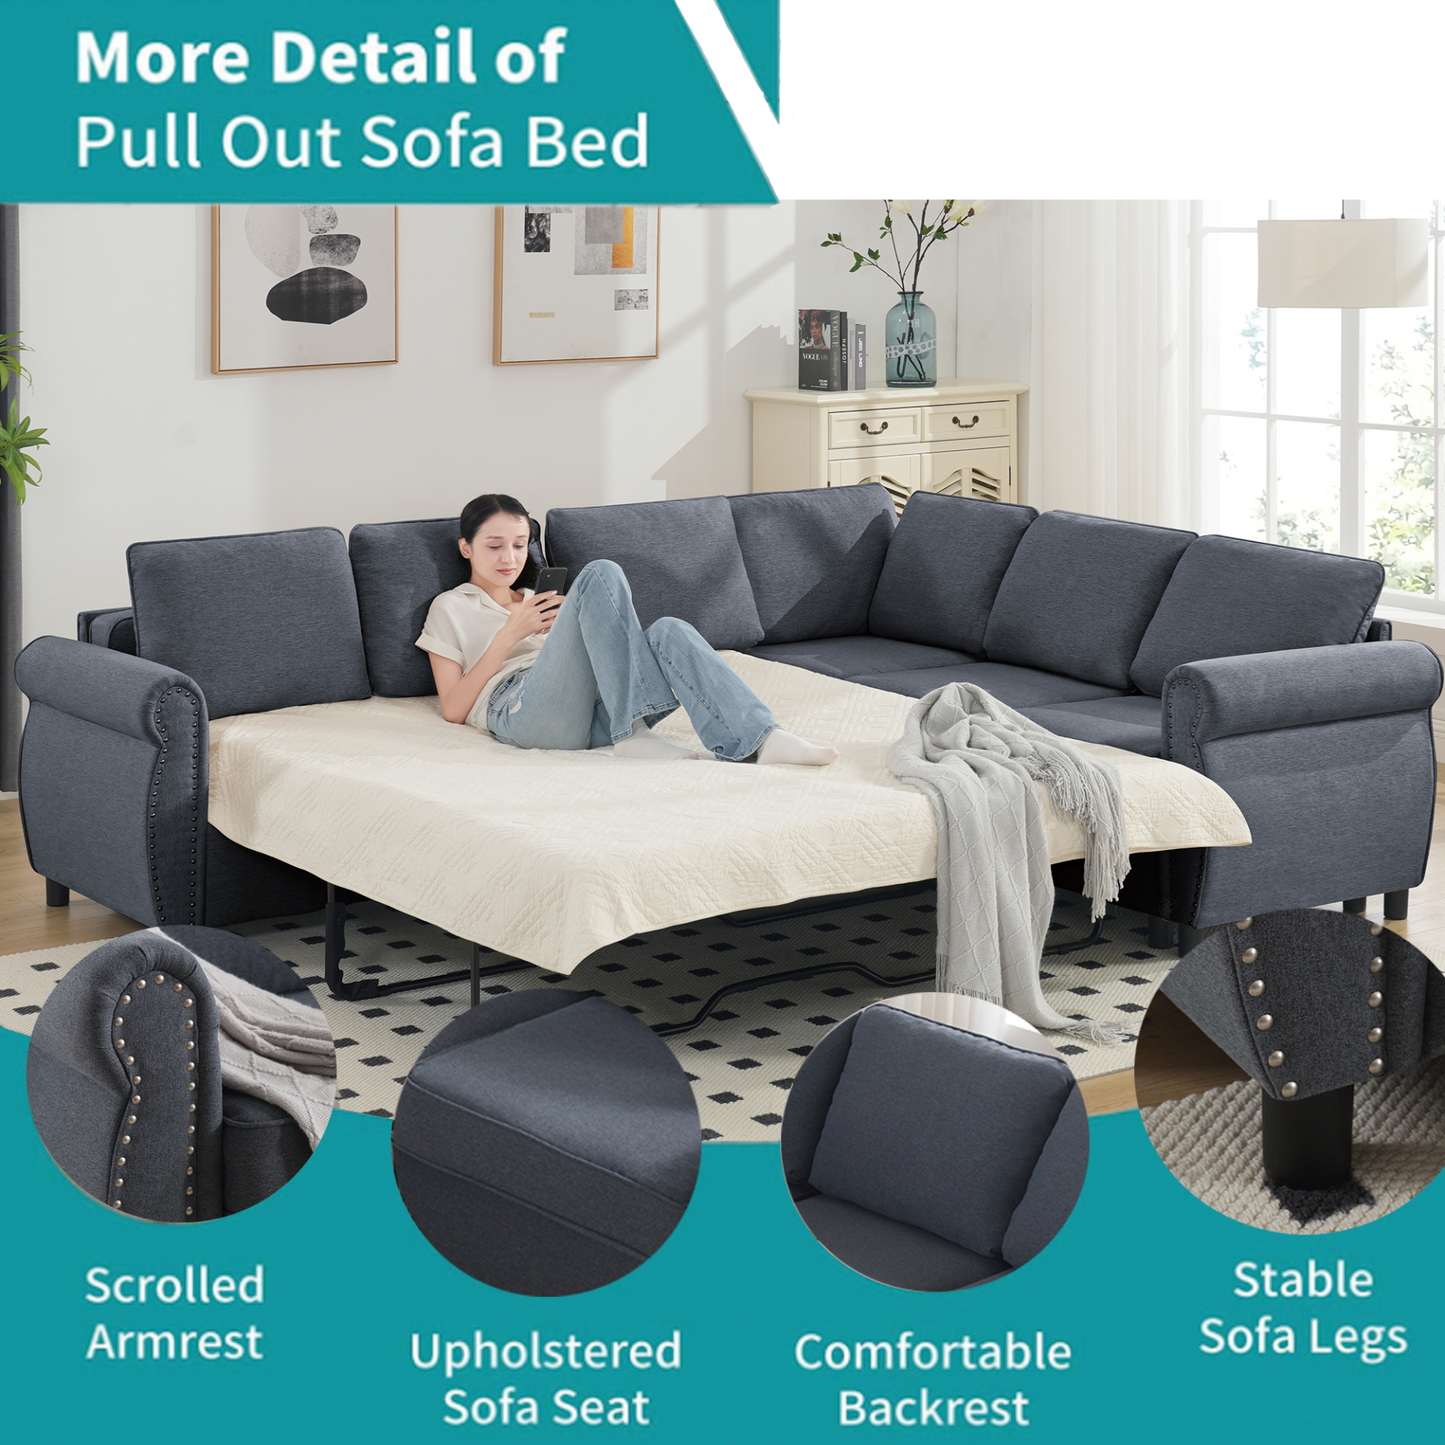 Sleeper Sofa, 2 in 1 Pull Out Couch Bed,6 seater sofa bed, L Shaped Sleeper Sectional Sofa Couch,Riveted sofa,104'' Large combined sofa Bed in living room, Dark Gray, Goodies N Stuff